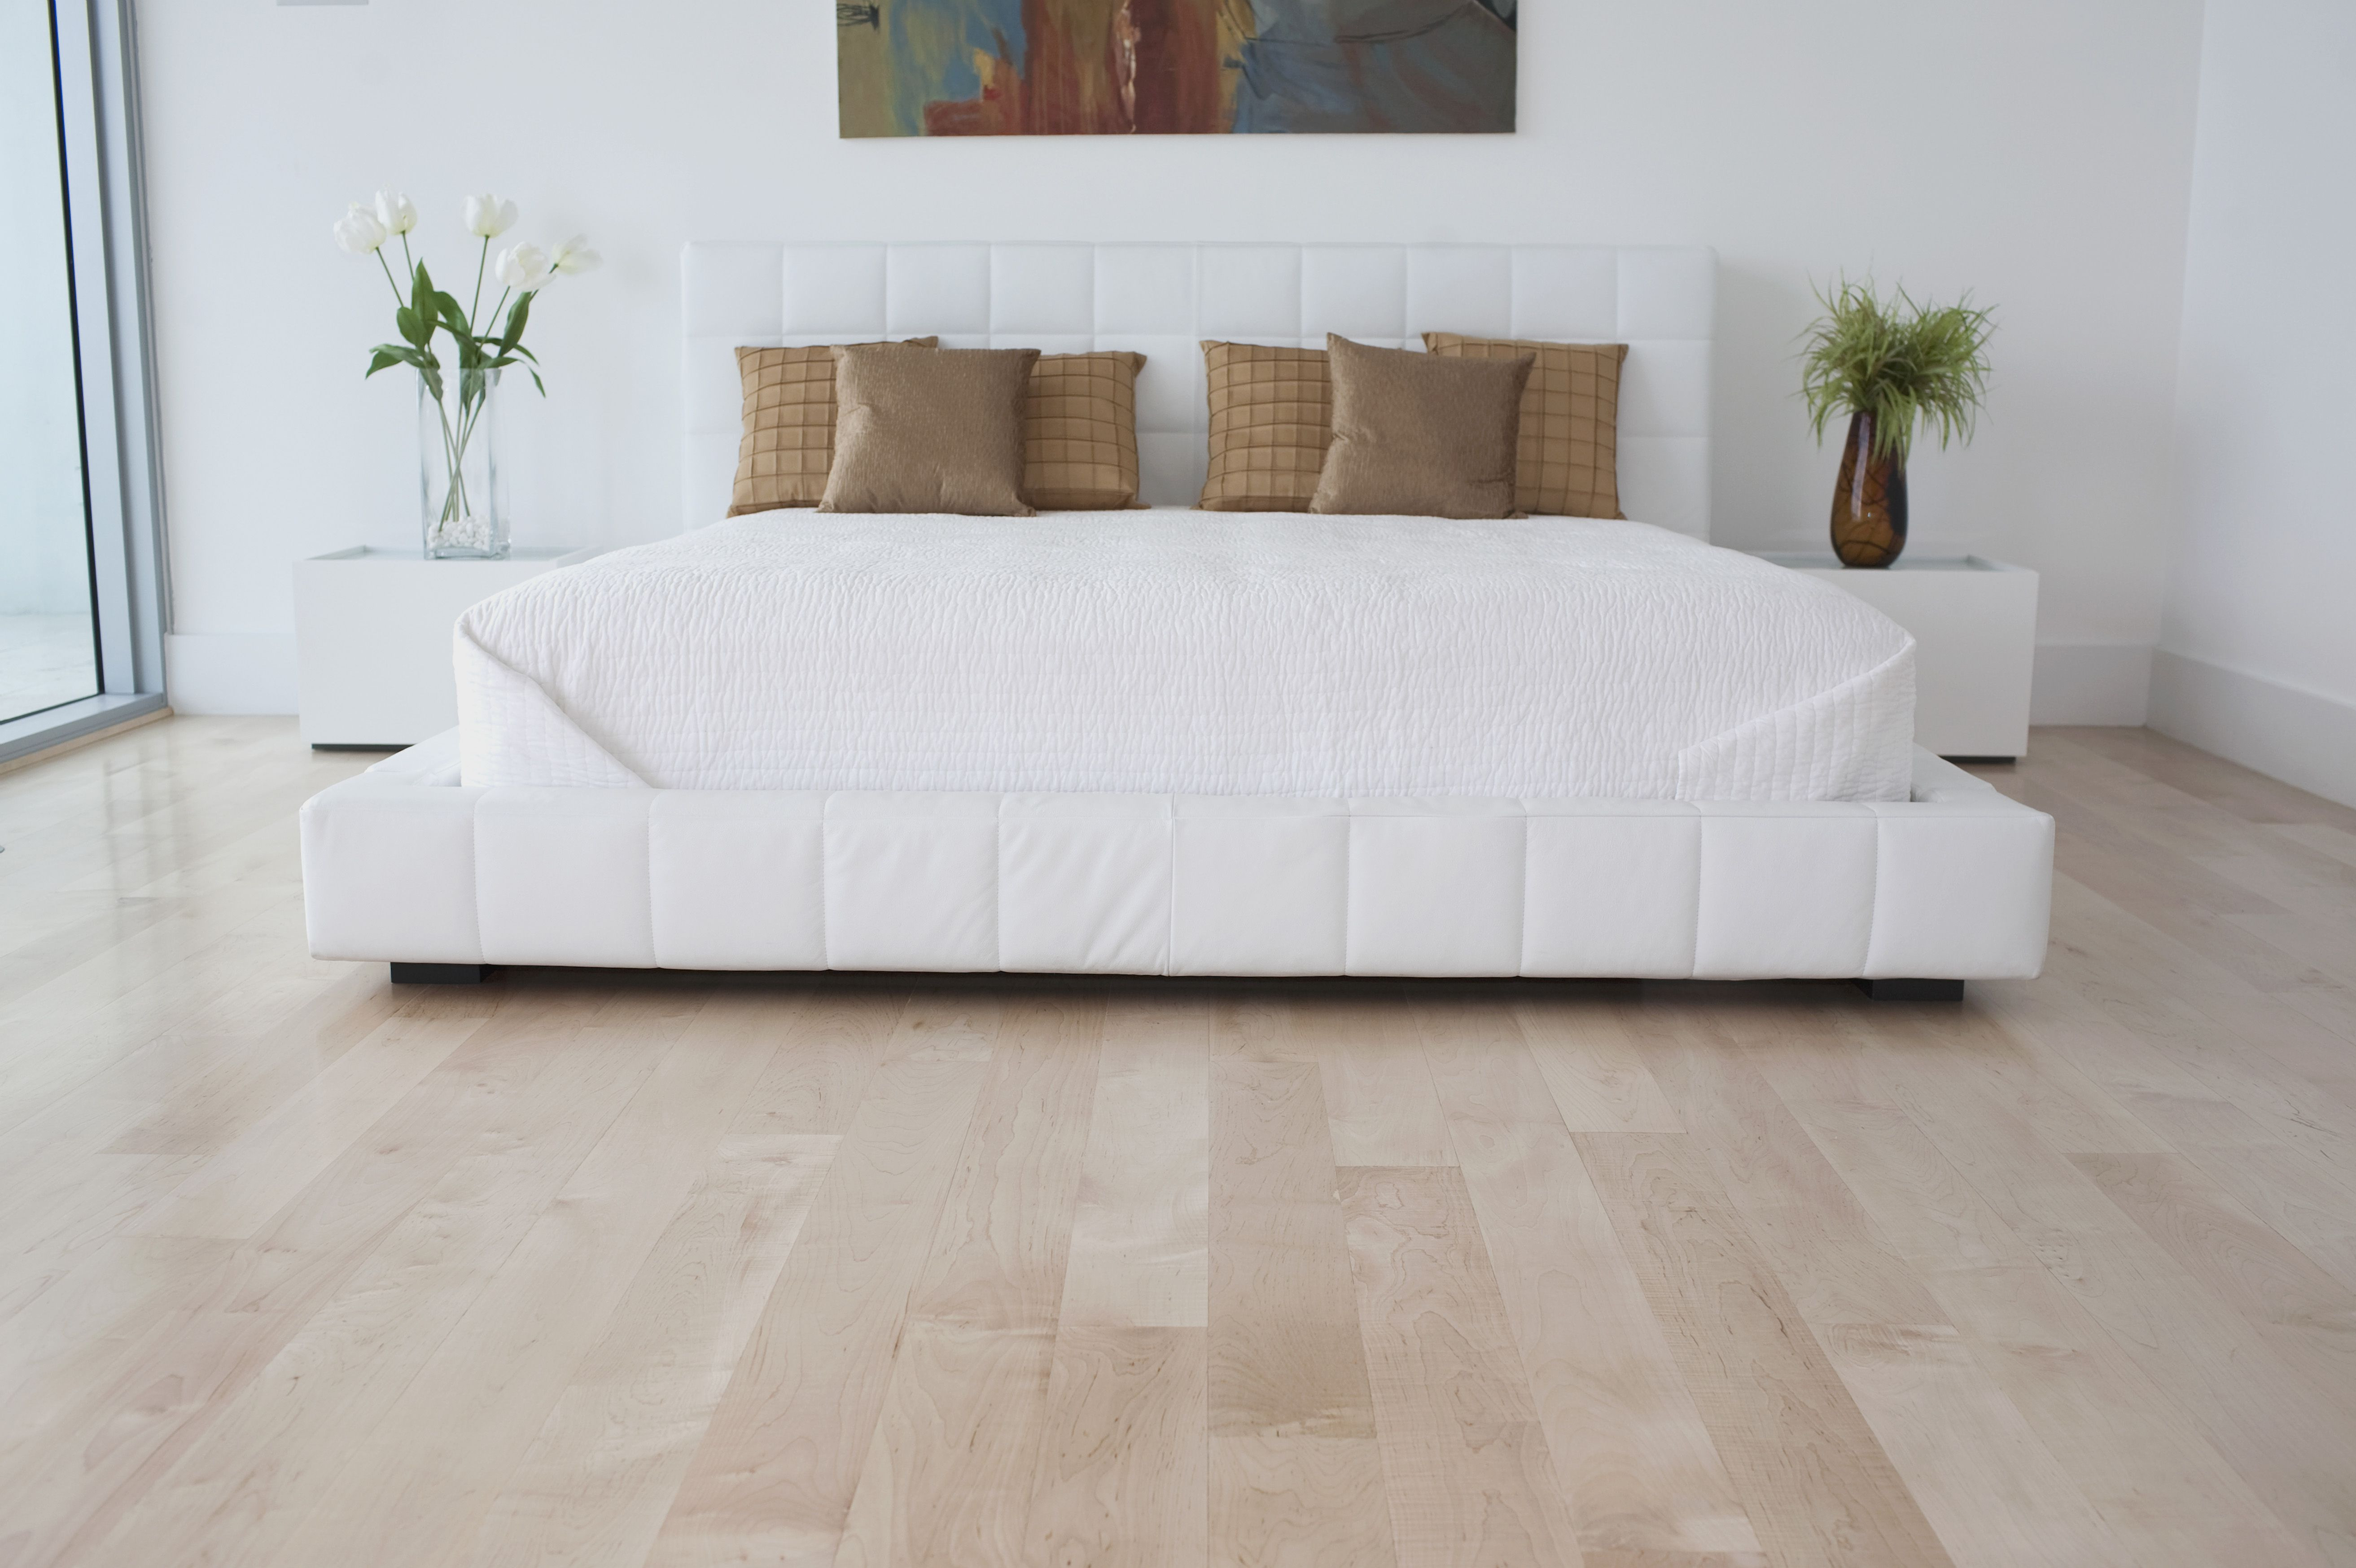 15 Great Hardwood Floor Ideas Styles 2024 free download hardwood floor ideas styles of 5 best bedroom flooring materials for interiors of a bedroom 126171674 57be063d3df78cc16e3cc6cf